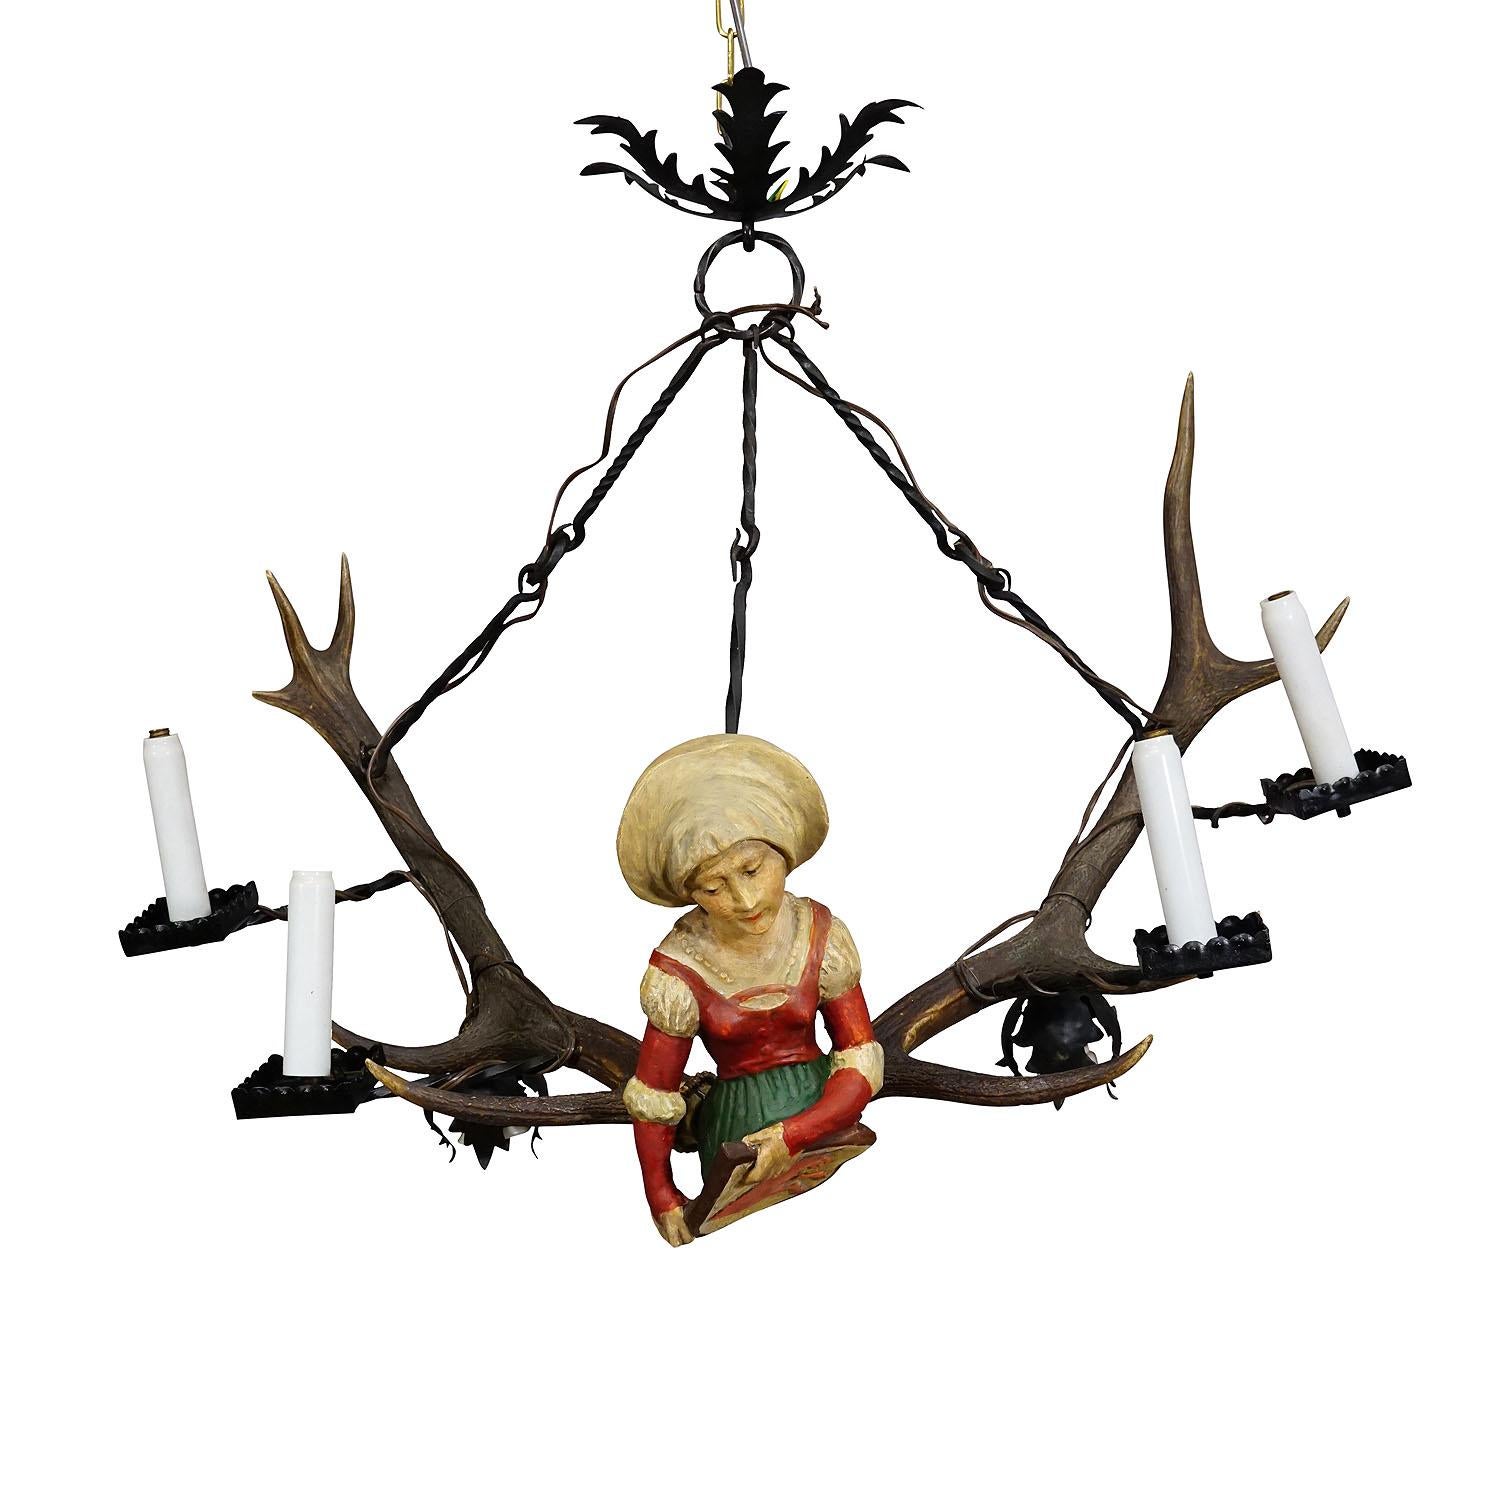 Antique Lusterweibchen of a Medieval Noble Lady ca. 1880s

A great antique chandelier featuring a medieval noble lady holding a heraldic blazon. The sculpture is made of handcarved and painted wood and mounted on a large pair of deer antlers. It